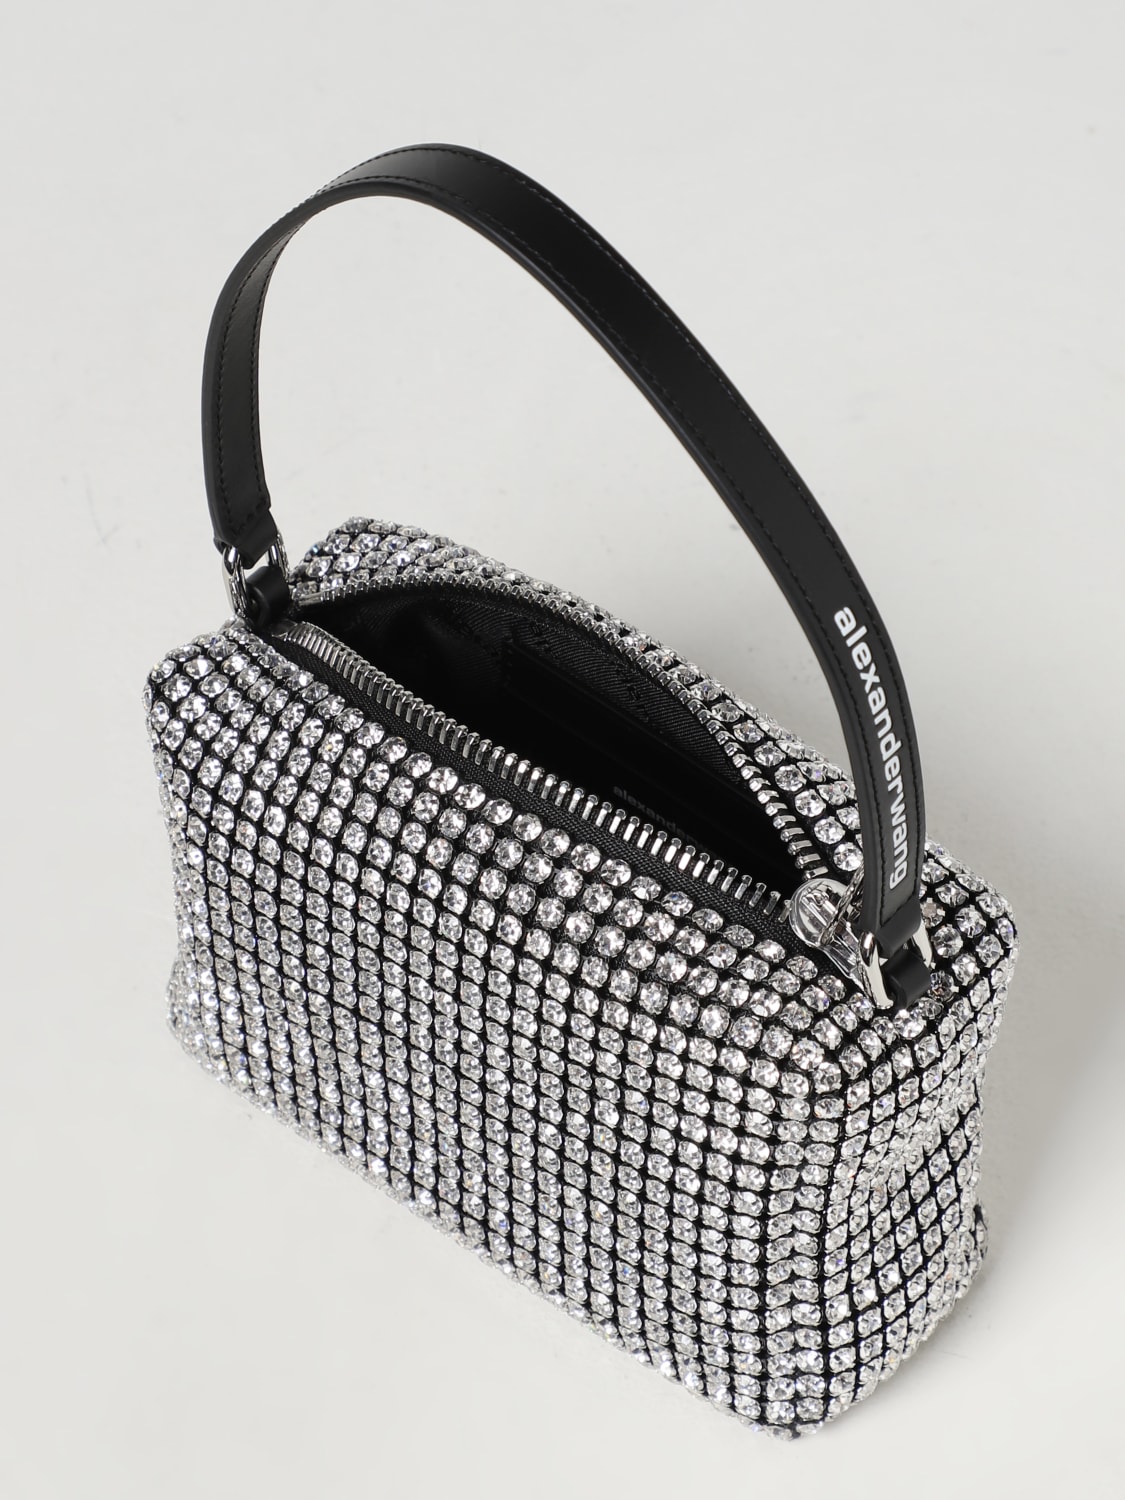 Alexander Wang Outlet: Wangloc bag in leather and crystals